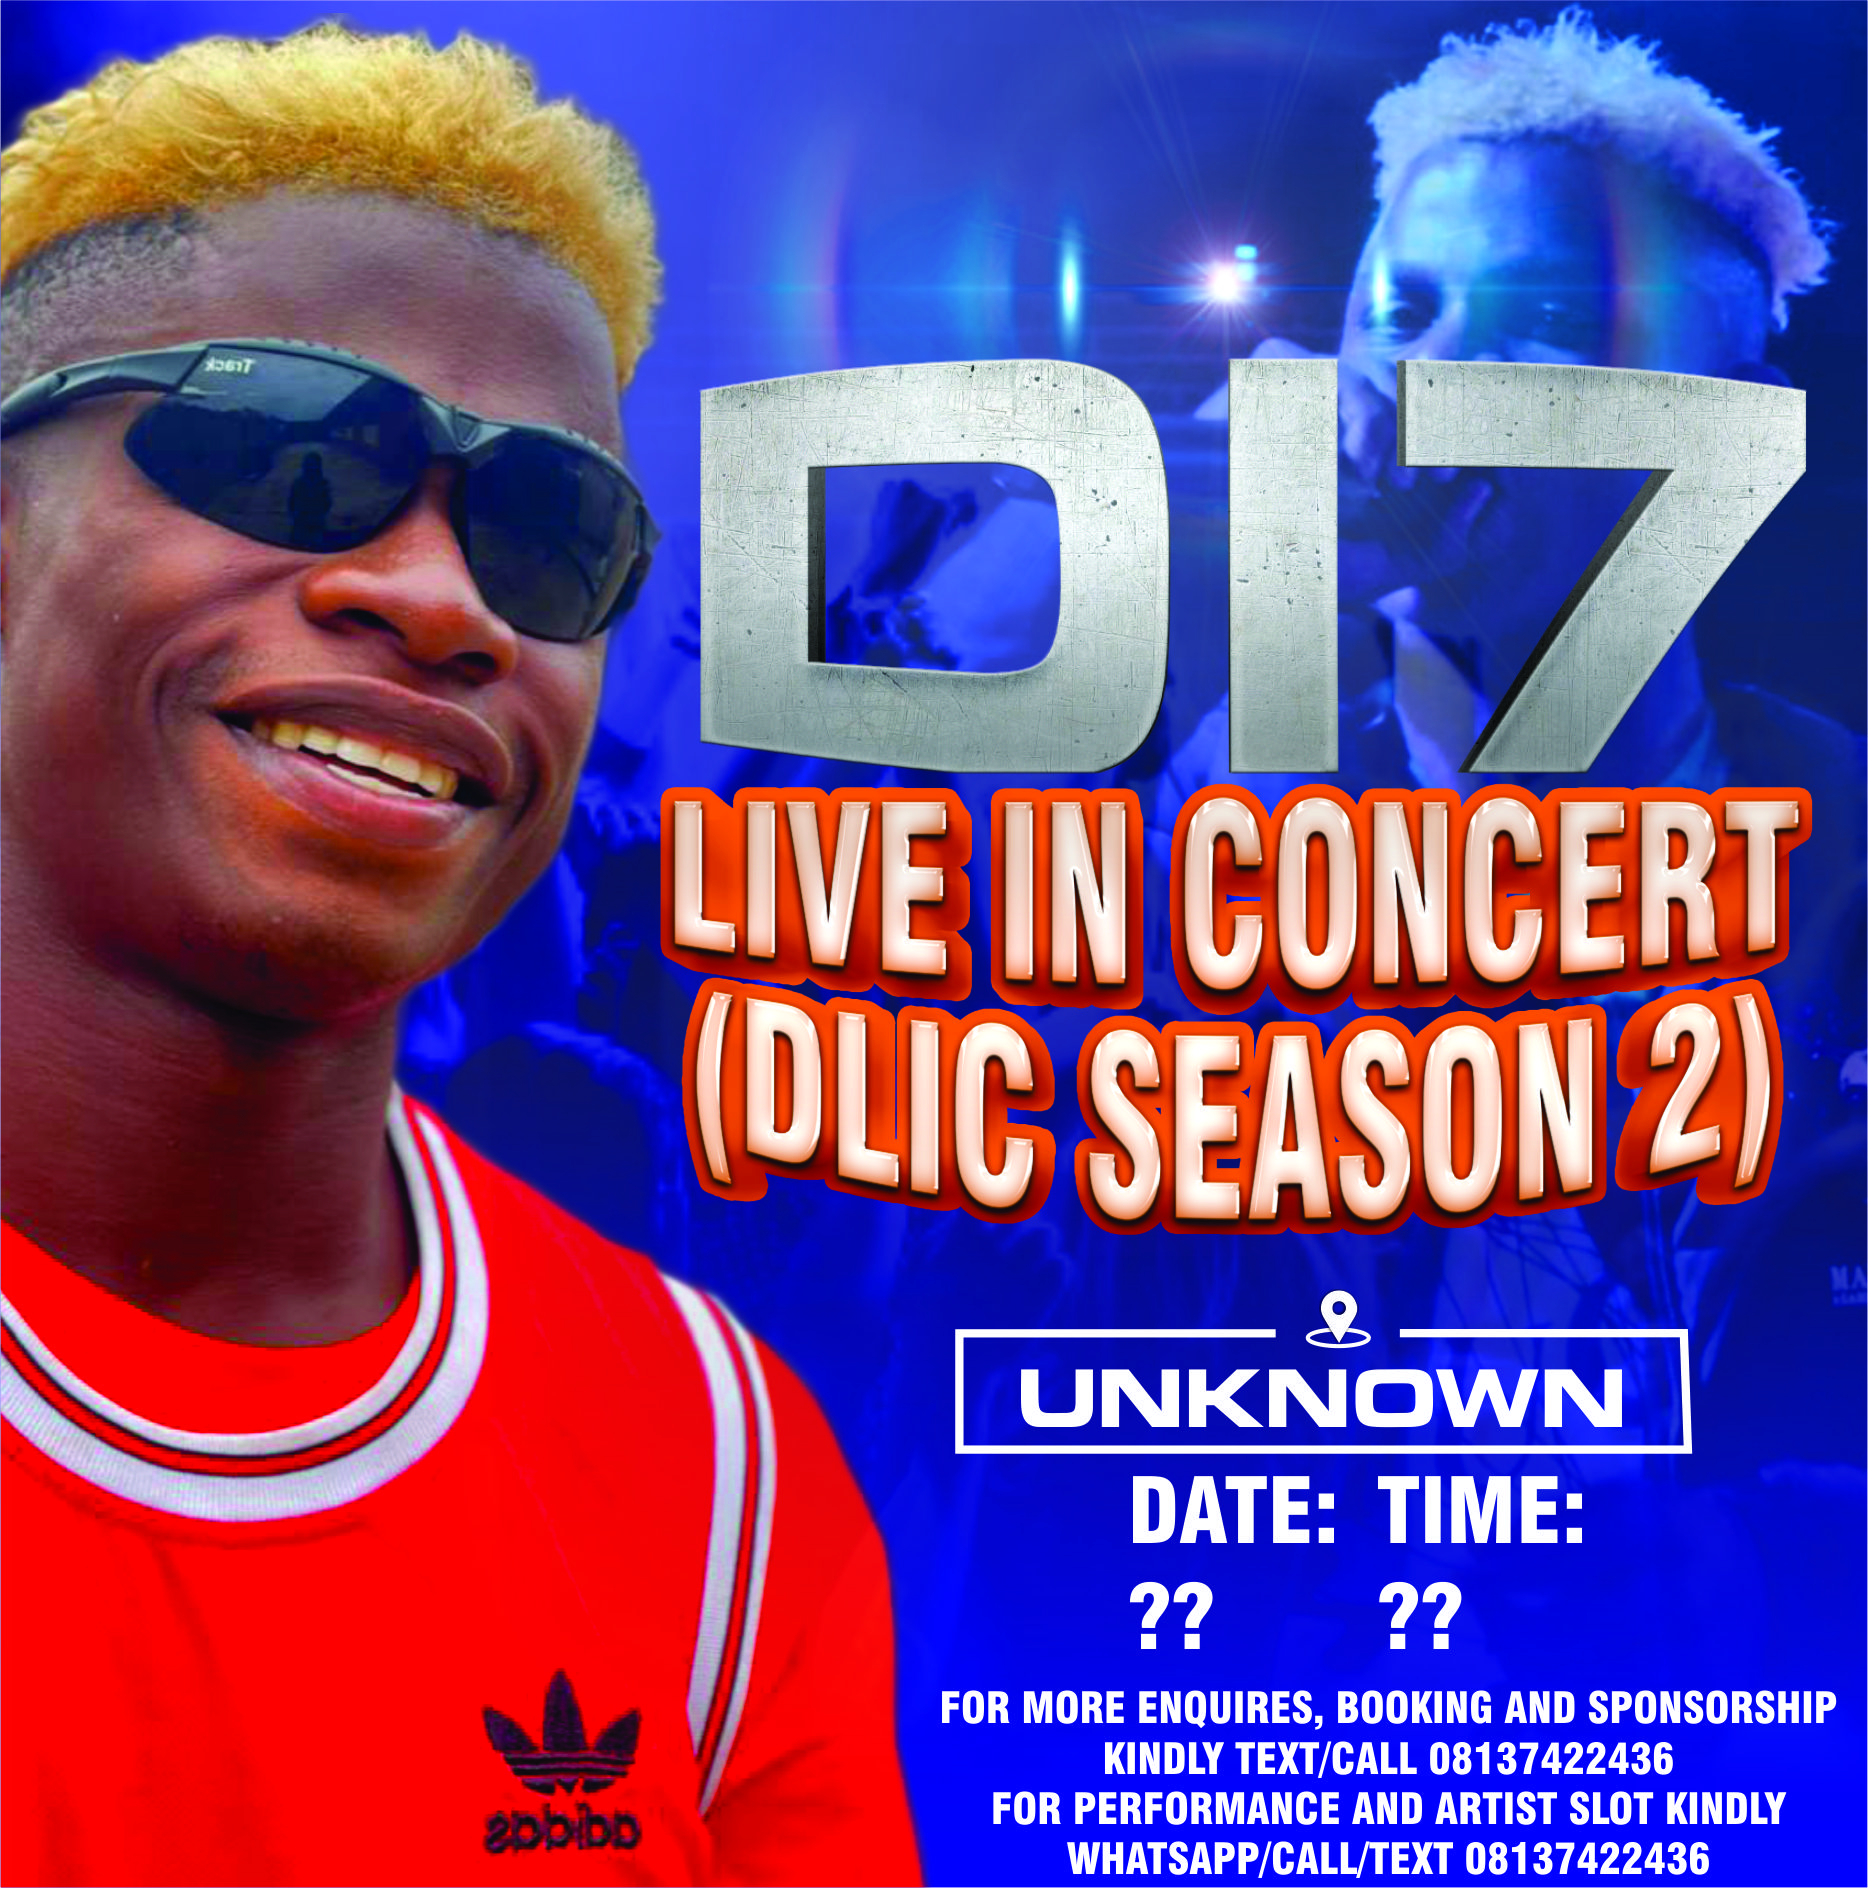 DLIC SEASON 2 Post free event in Nigeria using tickethub.ng, buy and sell tickets to event